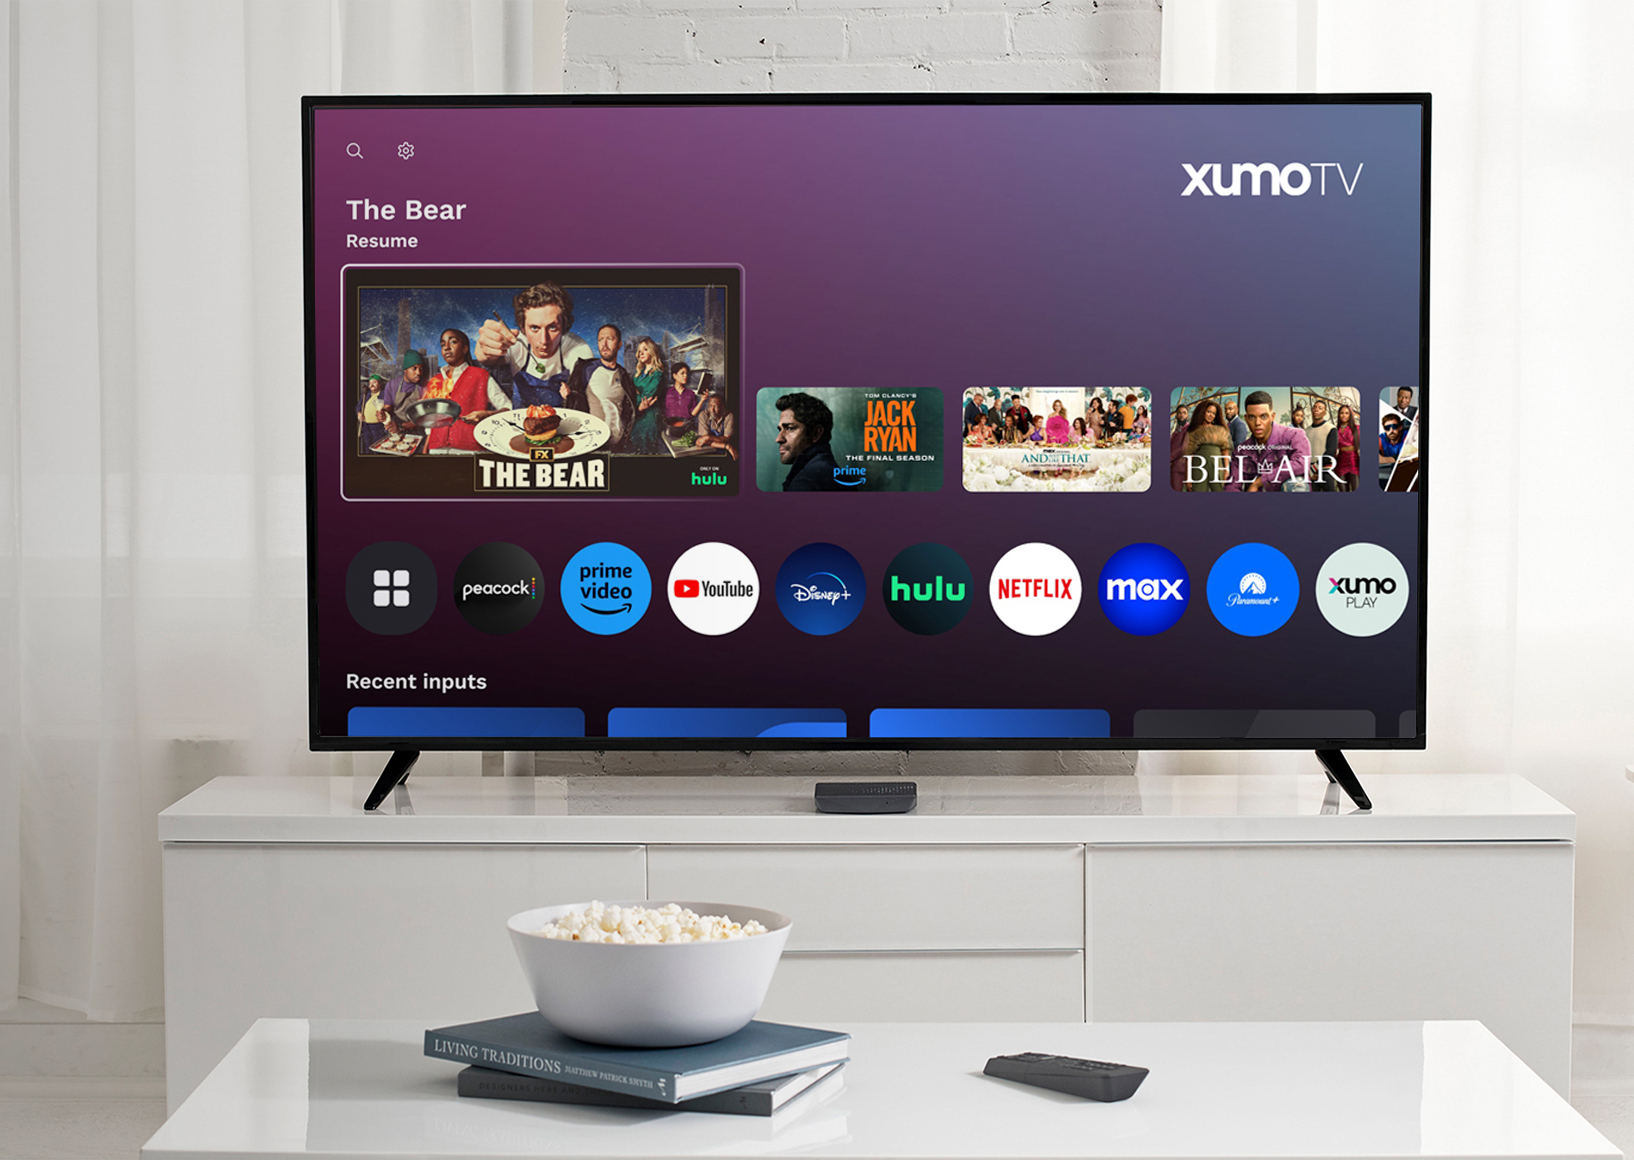 Comcast and Charter are Partnering With Best Buy For Xumo-Branded TVs